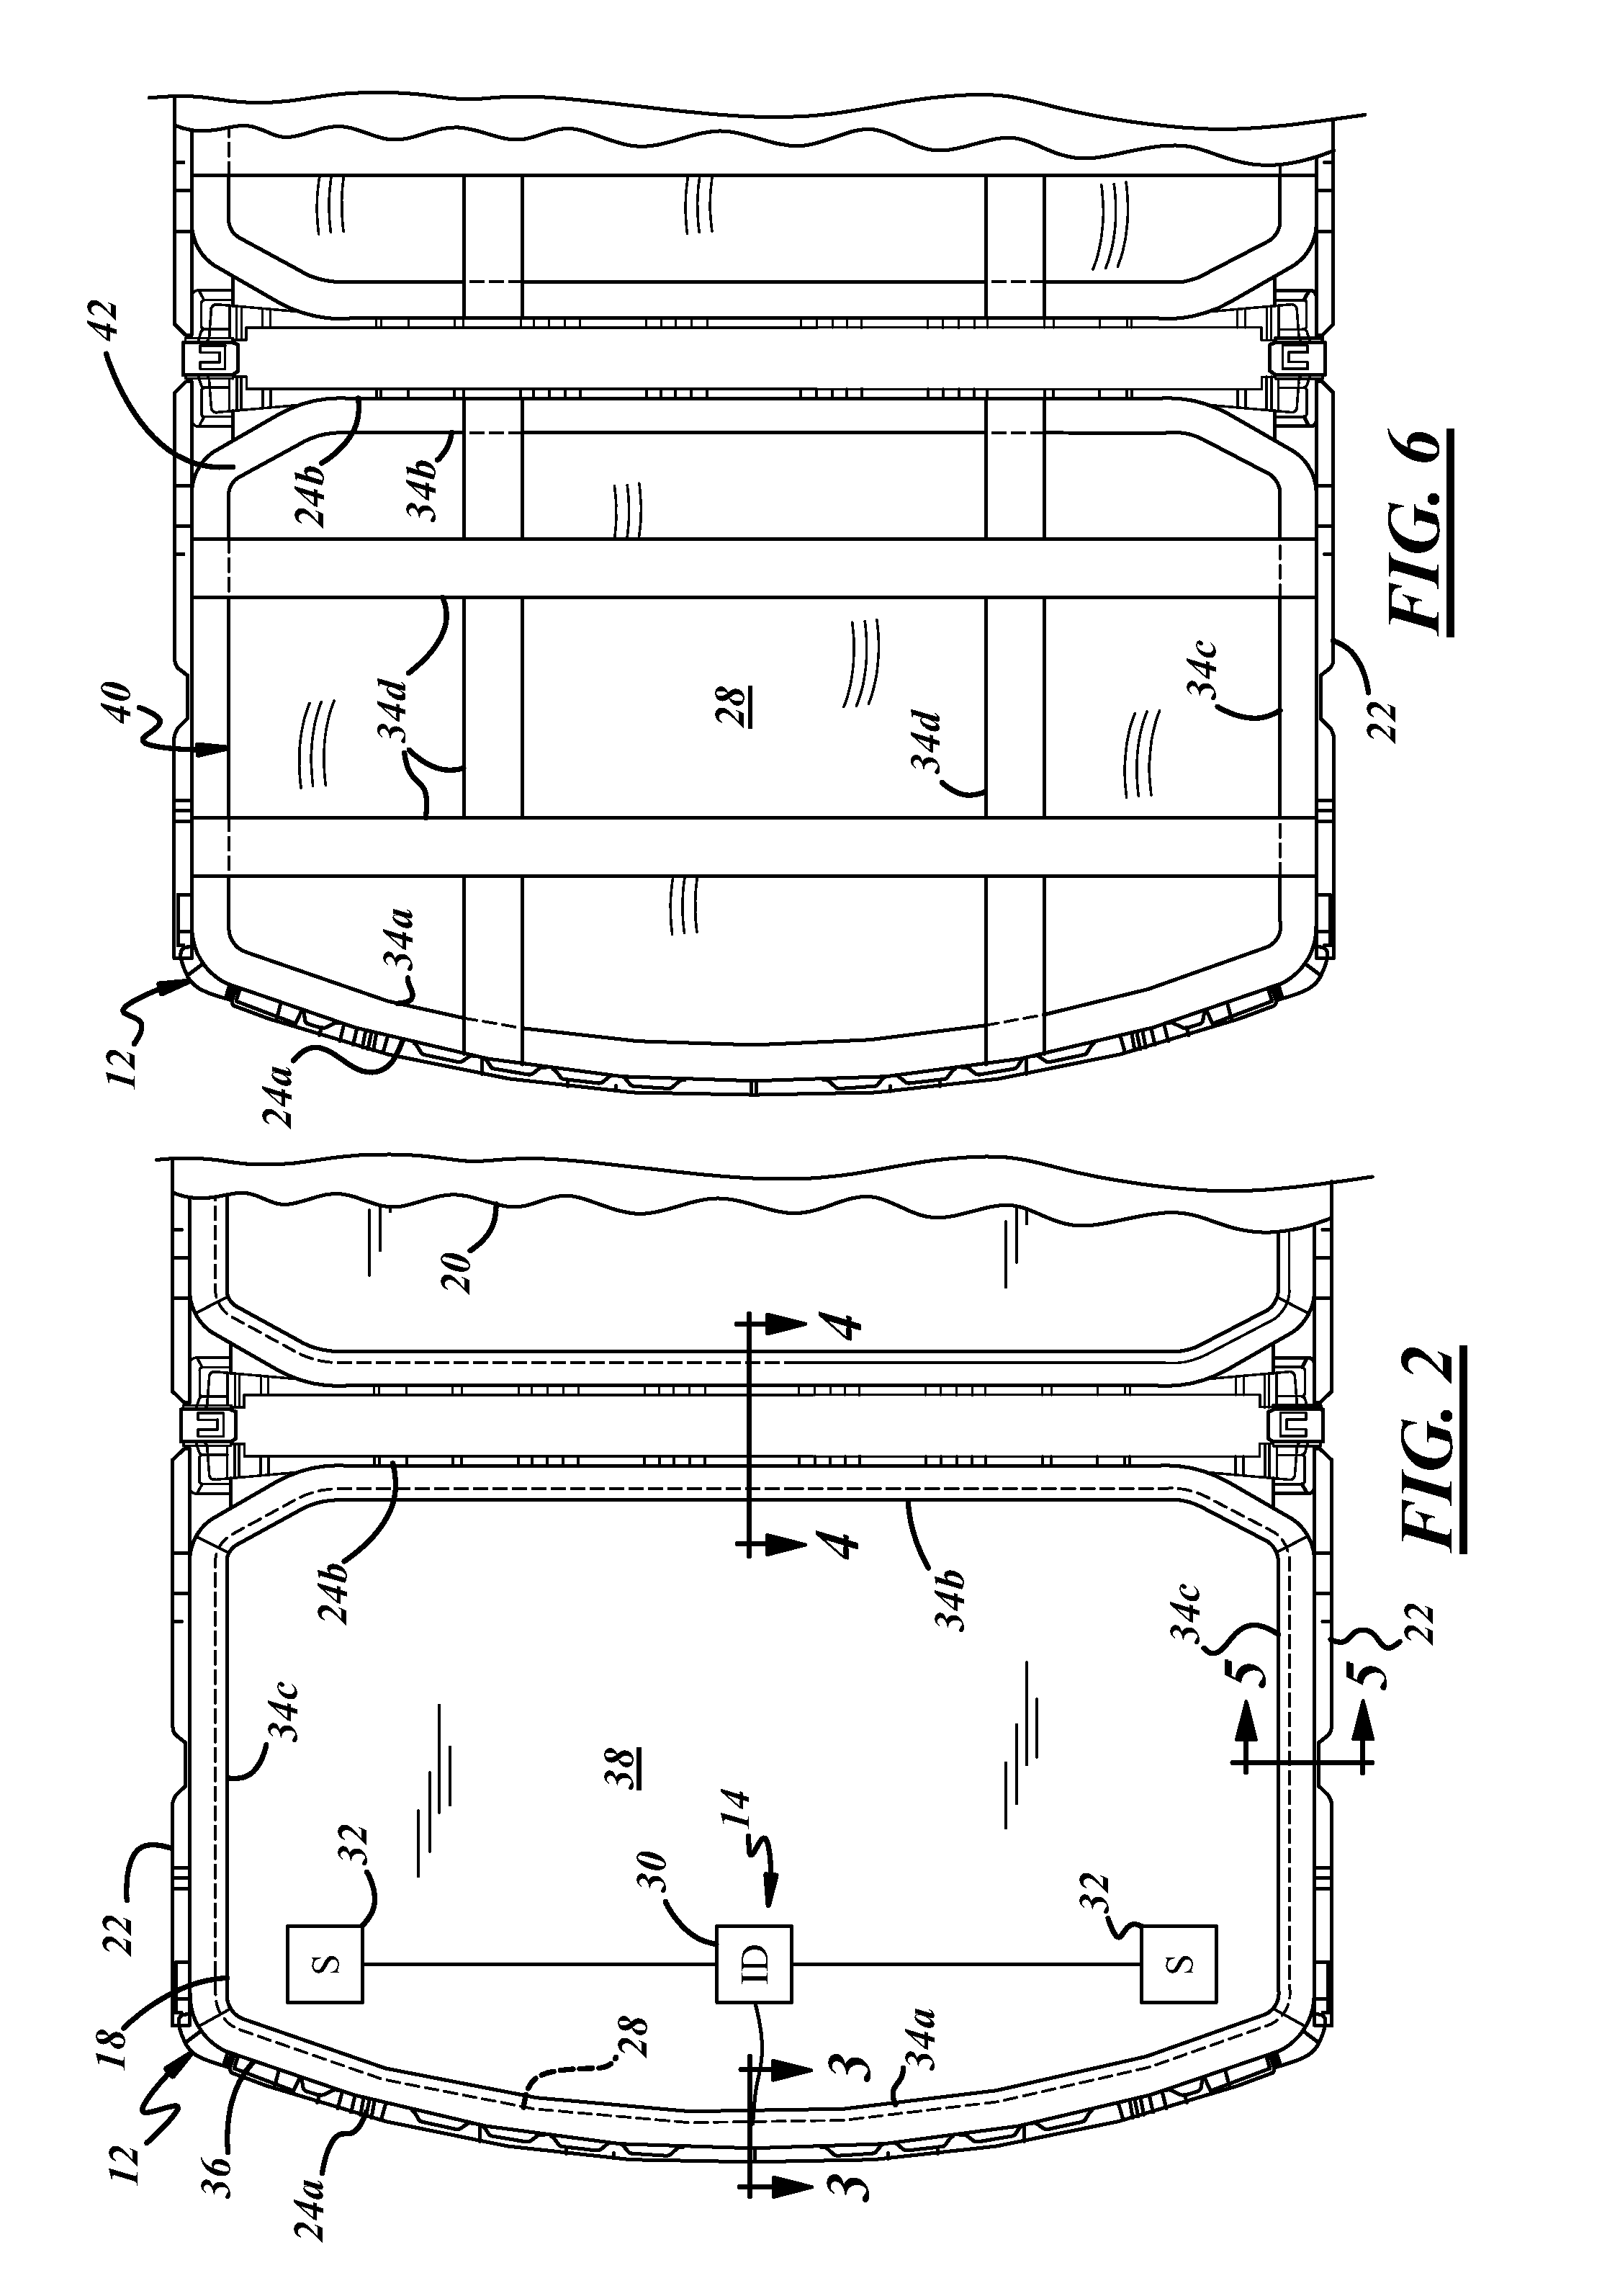 Pneumatically reinforced vehicle body structure